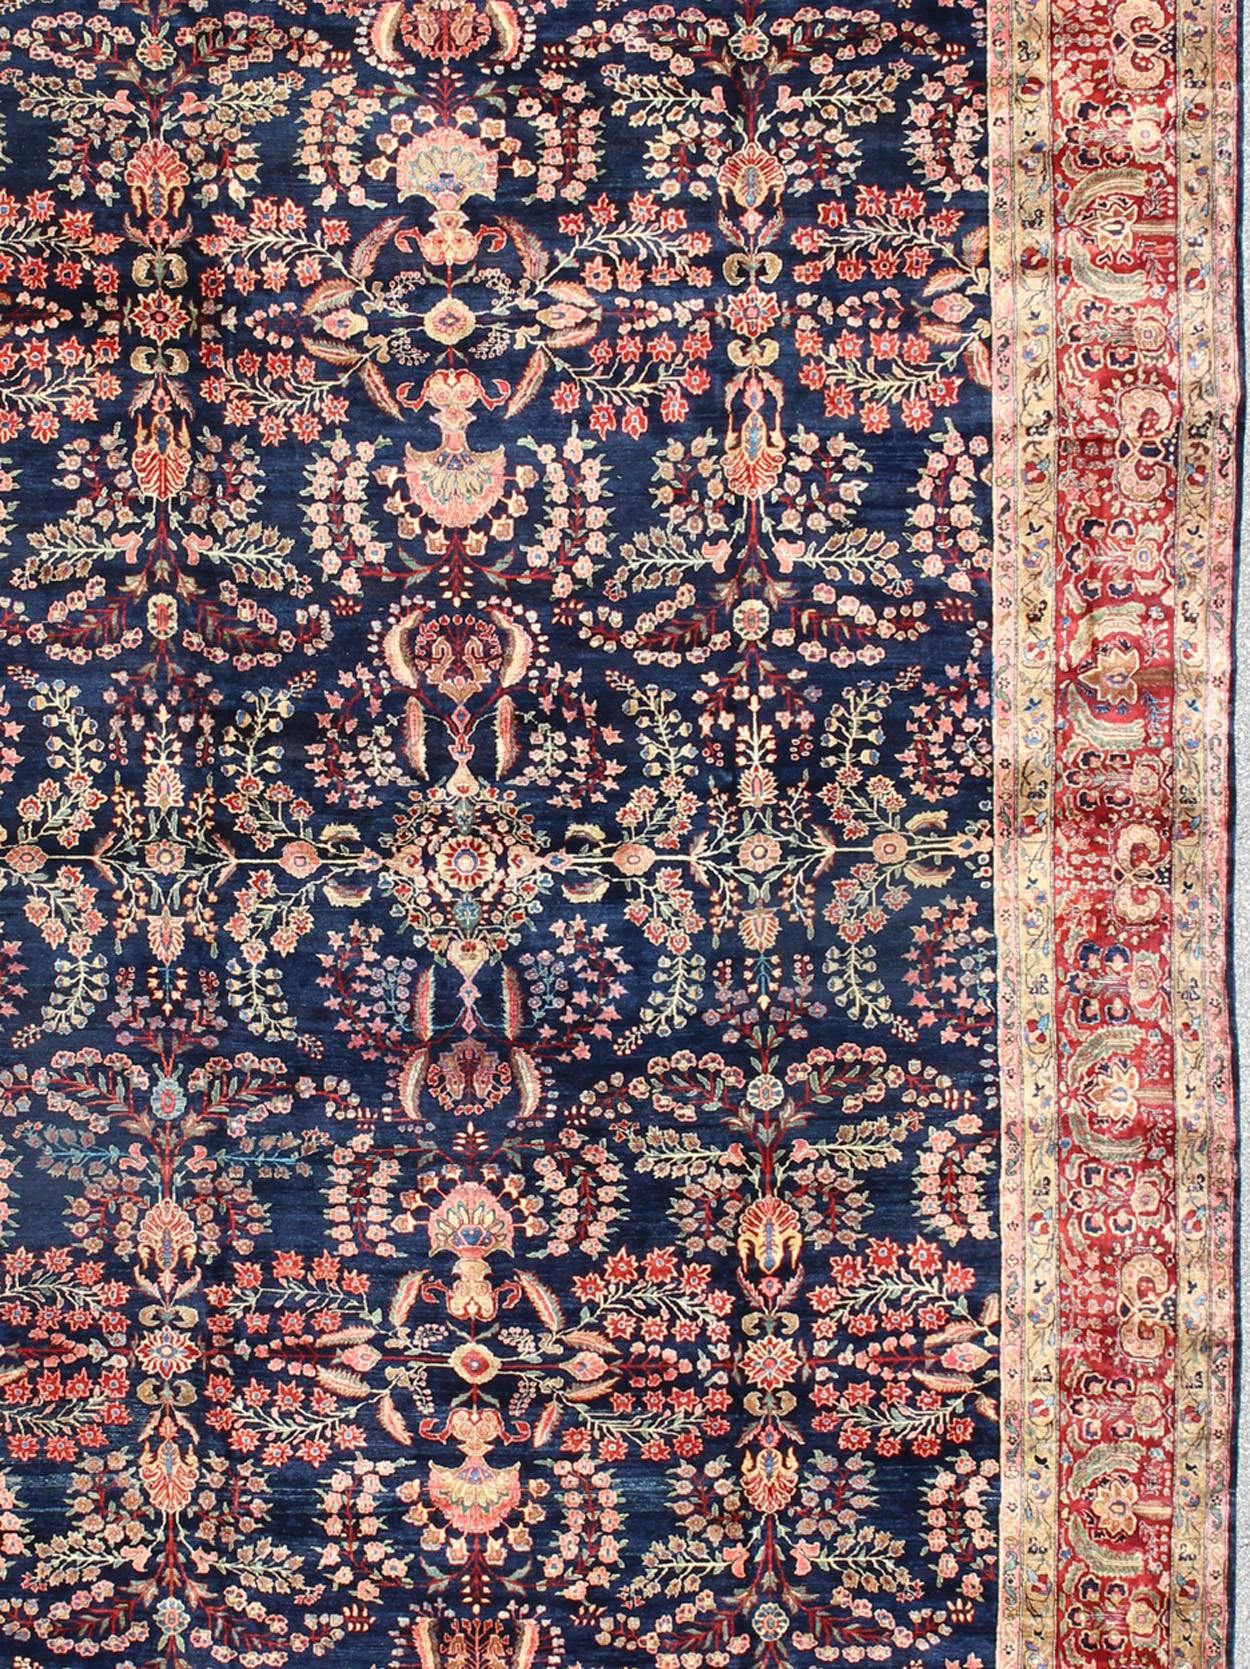 Hand-Knotted Antique Persian Finely Woven Sarouk Ferahan Rug with Intricate Details